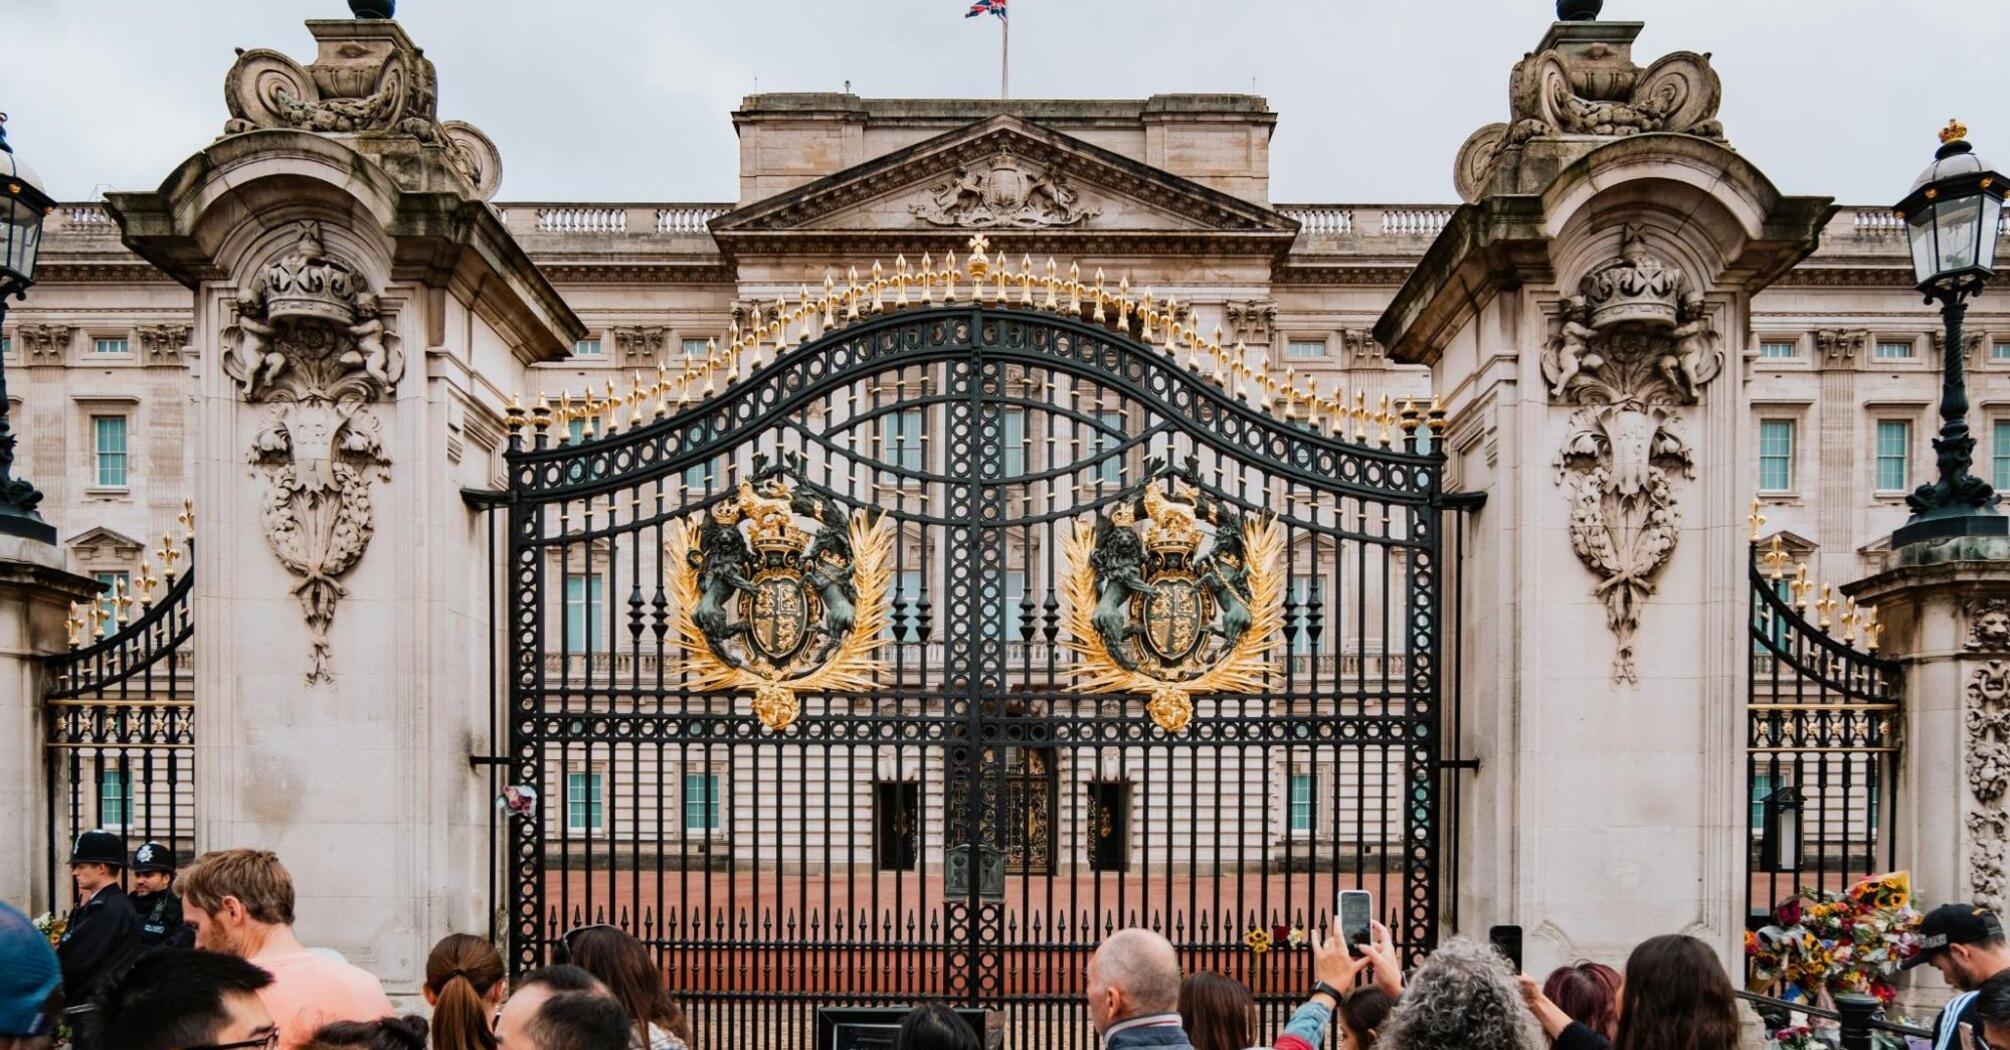 People in front of the gates of Buckingham Palace with the British flag